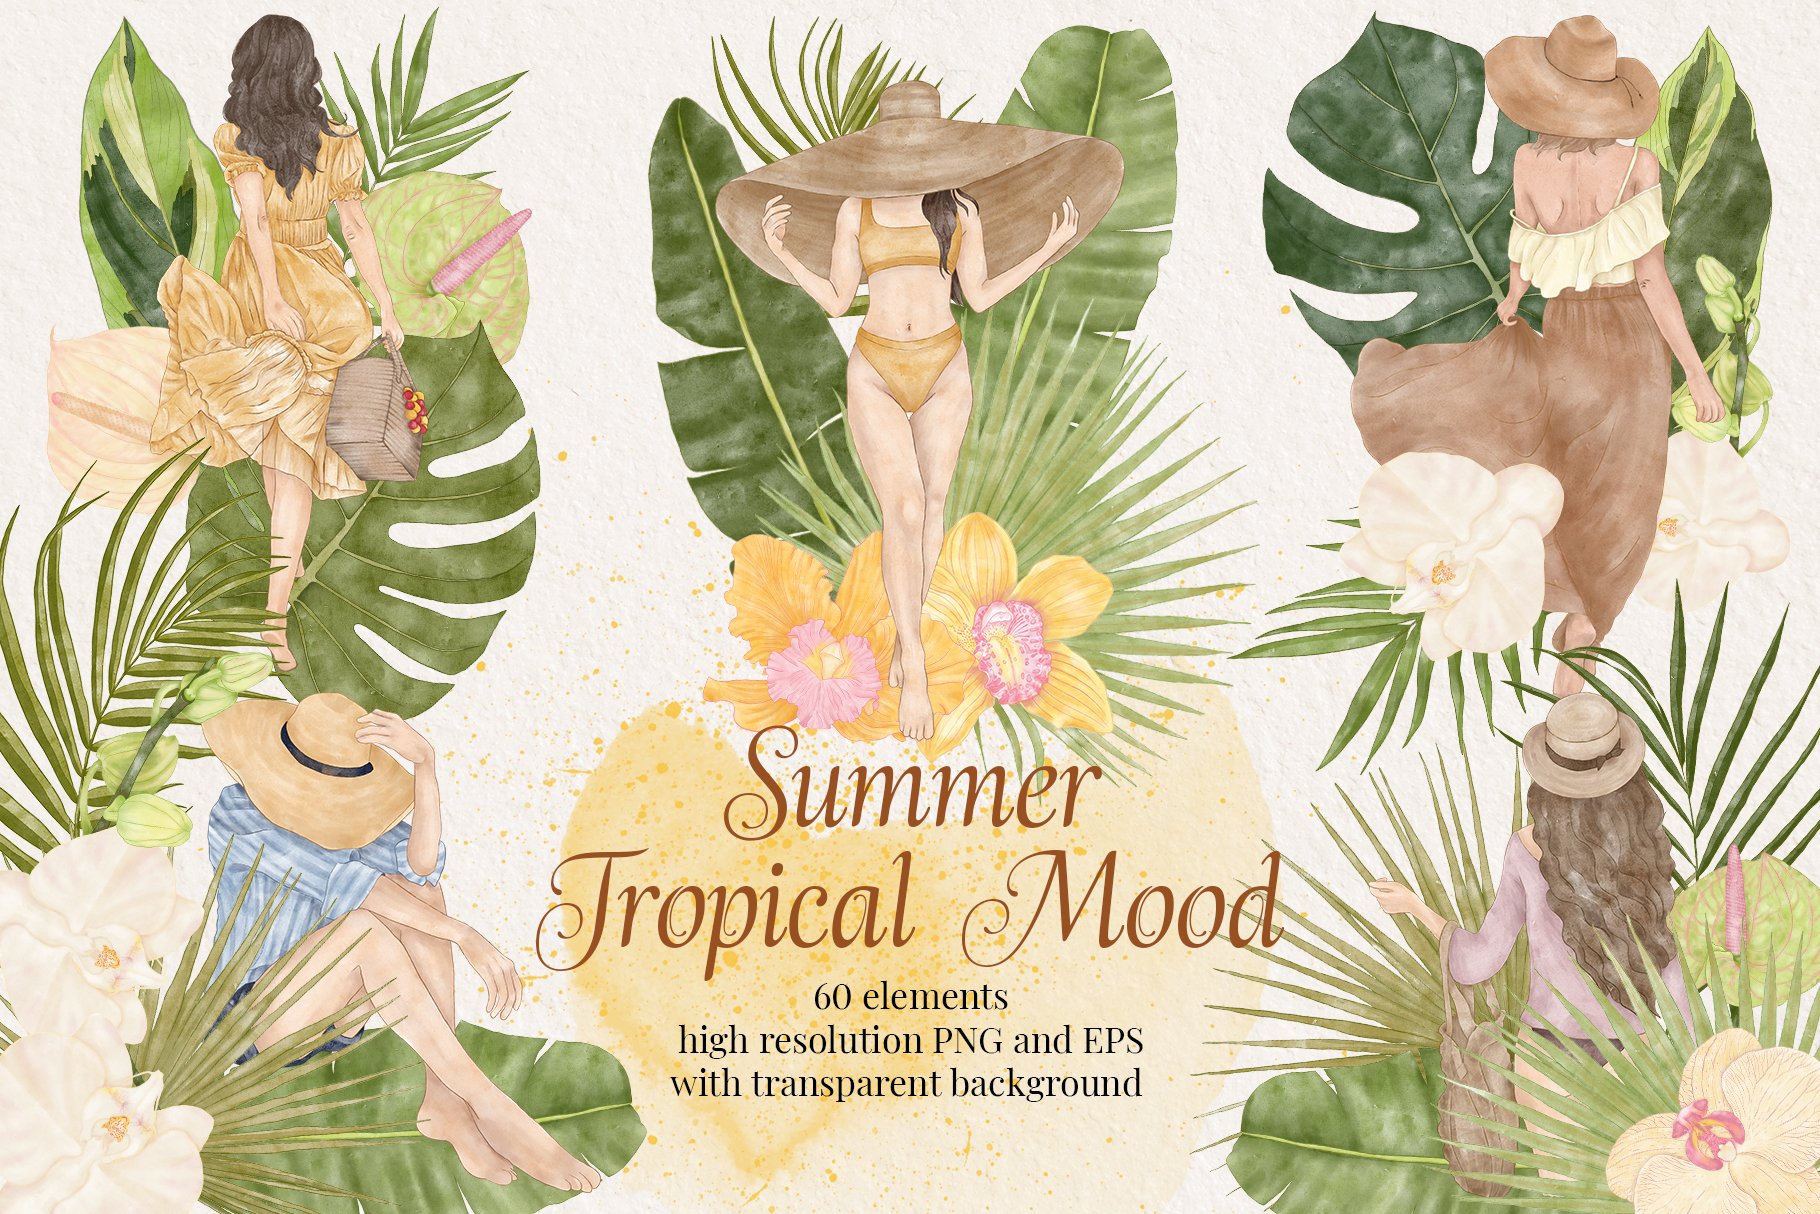 Summer Fashion Girl Tropical Clipart cover image.